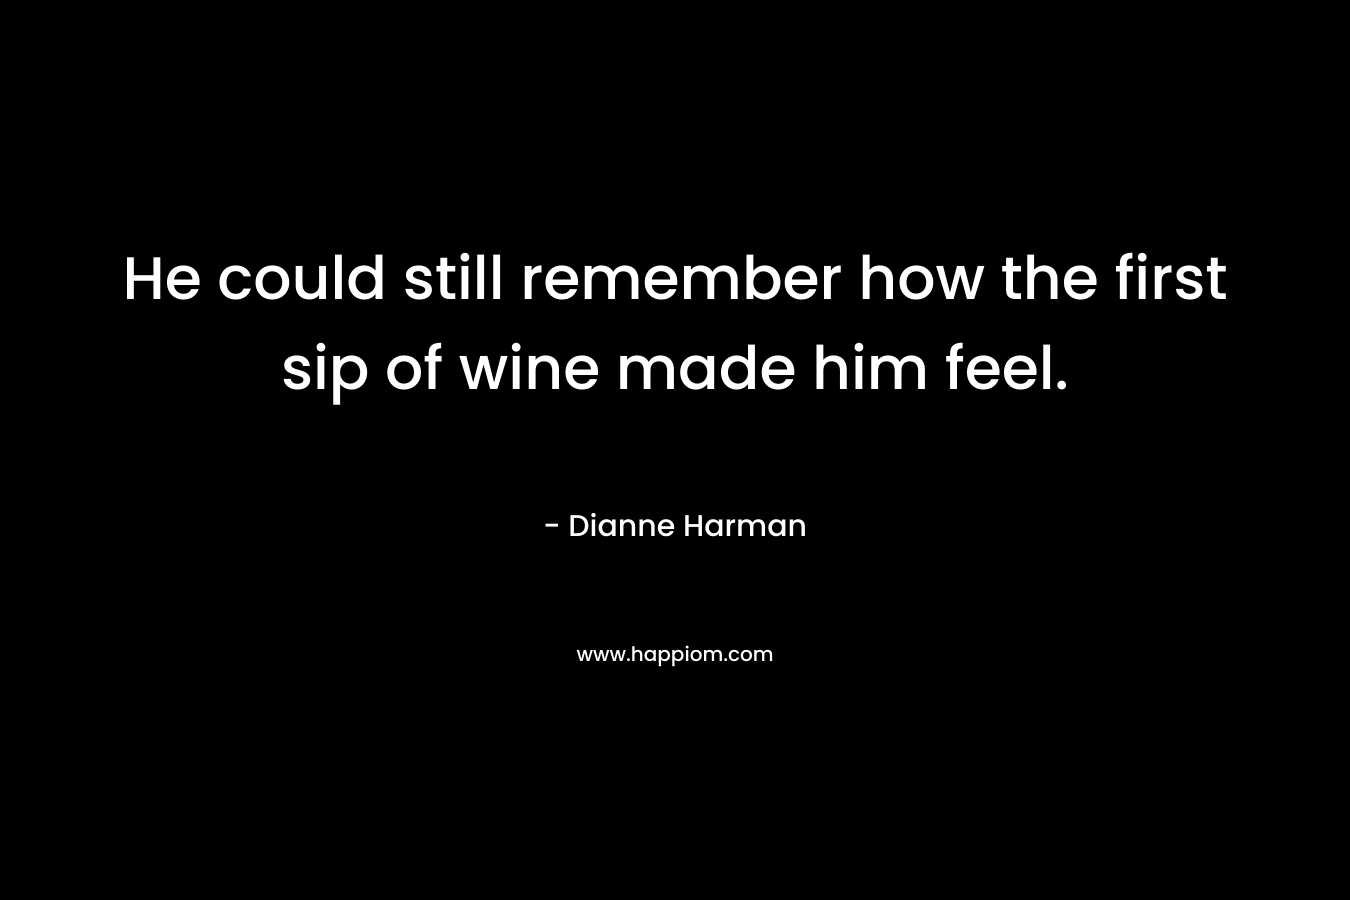 He could still remember how the first sip of wine made him feel. – Dianne Harman